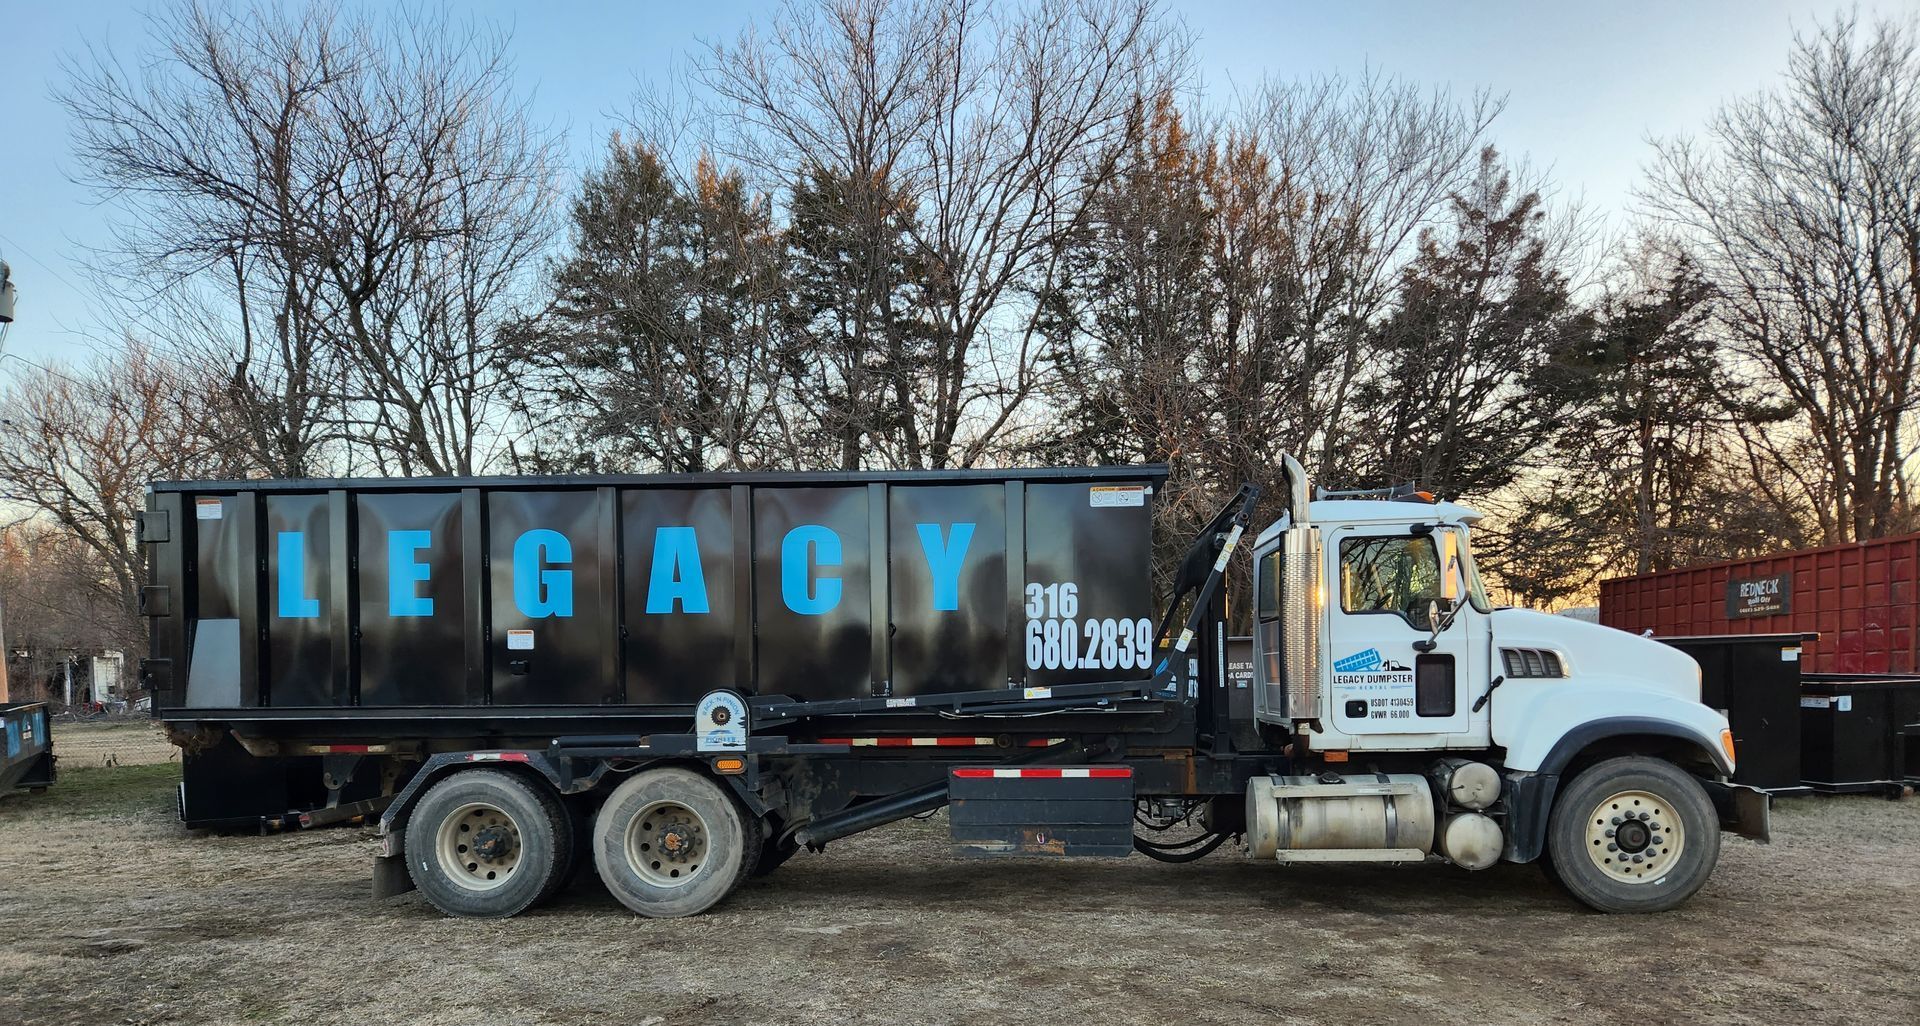 A dump truck is parked in a field with trees in the background and LEGACY with their business phone number on it